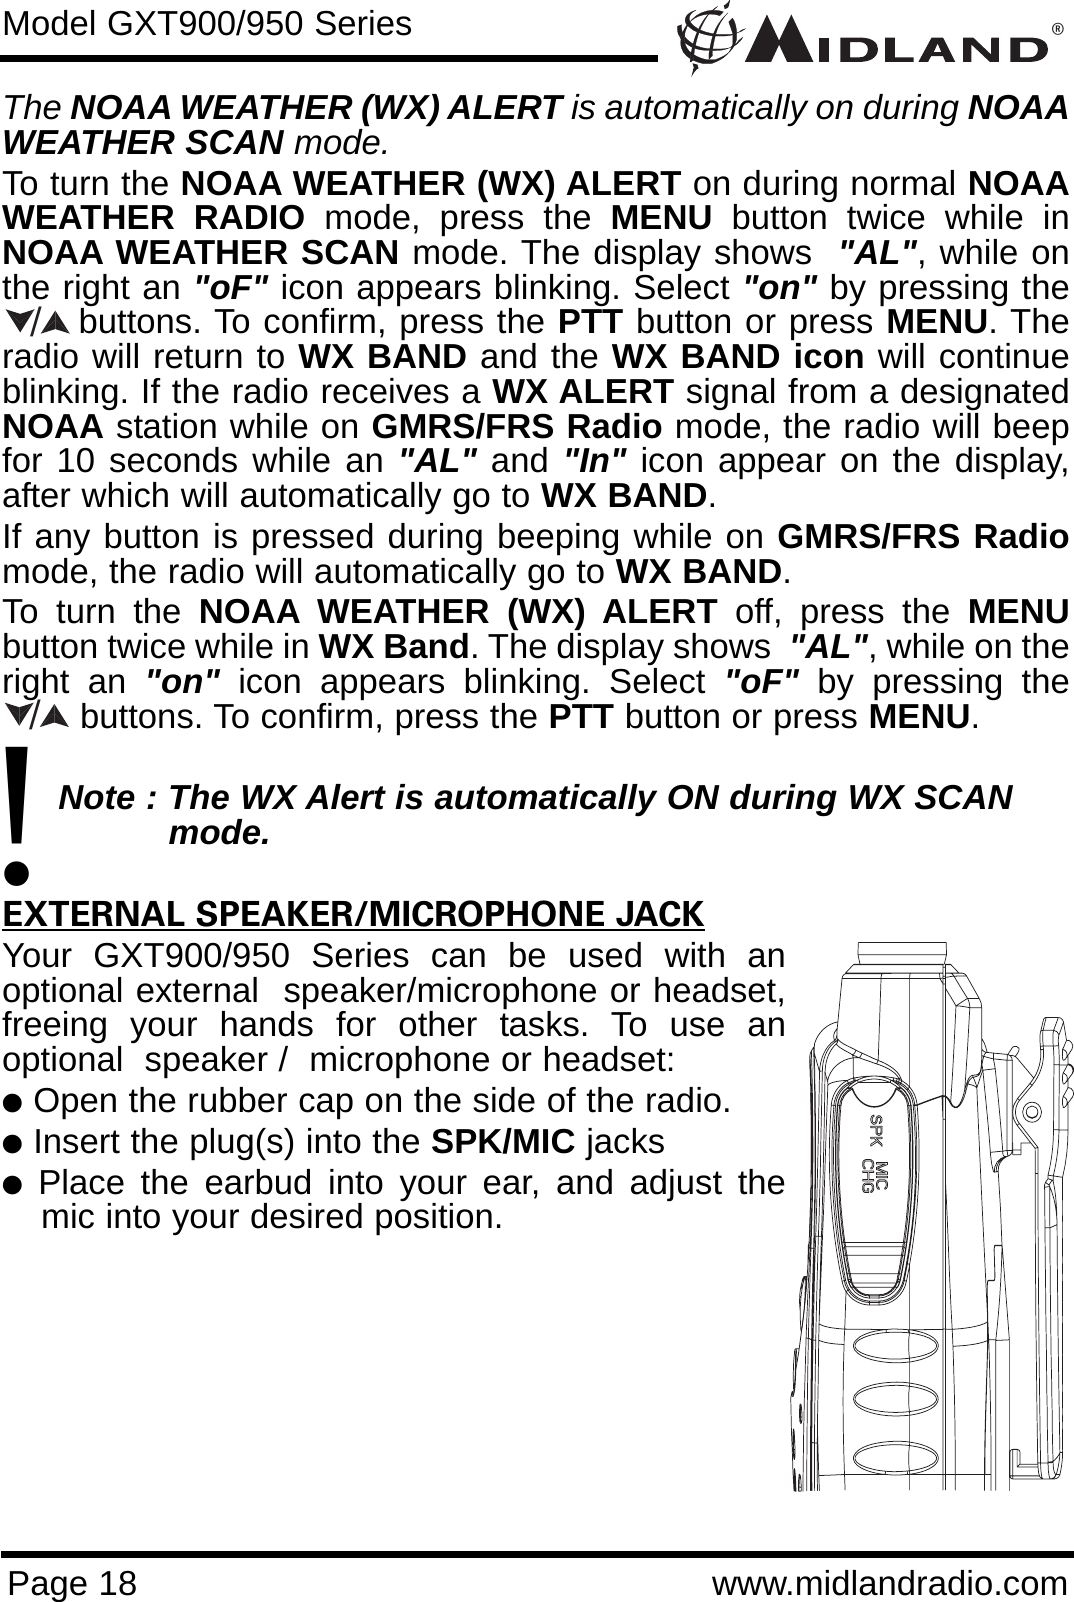 ®Page 18 www.midlandradio.comThe NOAA WEATHER (WX) ALERT is automatically on during NOAAWEATHER SCAN mode.To turn the NOAA WEATHER (WX) ALERT on during normal NOAAWEATHER RADIO mode, press the MENU button twice while inNOAA WEATHER SCAN mode. The display shows  &quot;AL&quot;, while onthe right an &quot;oF&quot; icon appears blinking. Select &quot;on&quot; by pressing thebuttons. To confirm, press the PTT button or press MENU. Theradio will return to WX BAND and the WX BAND icon will continueblinking. If the radio receives a WX ALERT signal from a designatedNOAA station while on GMRS/FRS Radio mode, the radio will beepfor 10 seconds while an &quot;AL&quot; and &quot;In&quot; icon appear on the display,after which will automatically go to WX BAND. If any button is pressed during beeping while on GMRS/FRS Radiomode, the radio will automatically go to WX BAND.To turn the NOAA WEATHER (WX) ALERT off, press the MENUbutton twice while in WX Band. The display shows  &quot;AL&quot;, while on theright an &quot;on&quot; icon appears blinking. Select &quot;oF&quot; by pressing thebuttons. To confirm, press the PTT button or press MENU.Note : The WX Alert is automatically ON during WX SCAN mode.EXTERNAL SPEAKER/MICROPHONE JACKYour GXT900/950 Series can be used with anoptional external  speaker/microphone or headset,freeing your hands for other tasks. To use anoptional  speaker /  microphone or headset:lOpen the rubber cap on the side of the radio.lInsert the plug(s) into the SPK/MIC jackslPlace the earbud into your ear, and adjust themic into your desired position.Model GXT900/950 Series/!/